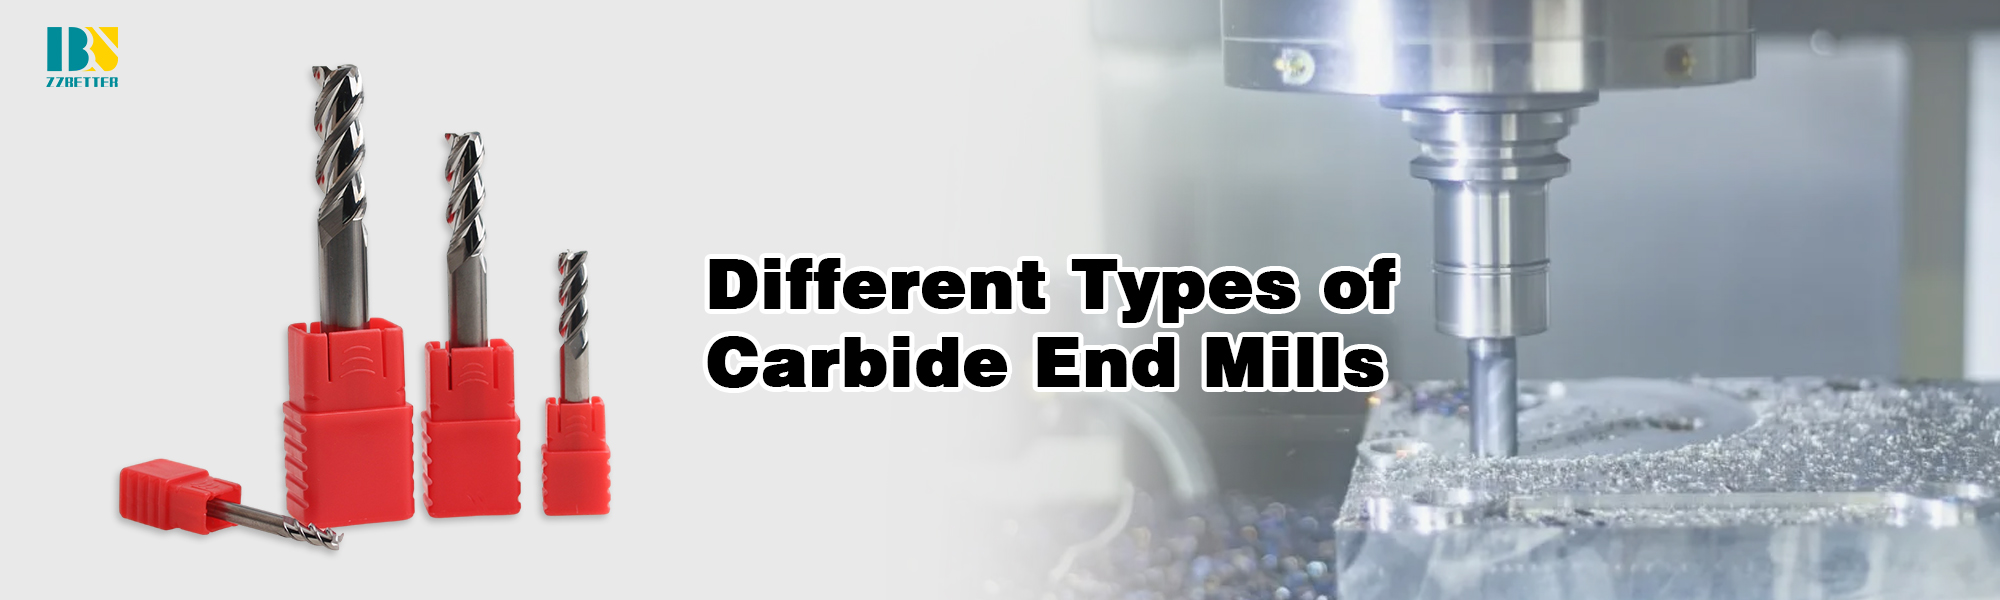 Different Types of Carbide End Mills